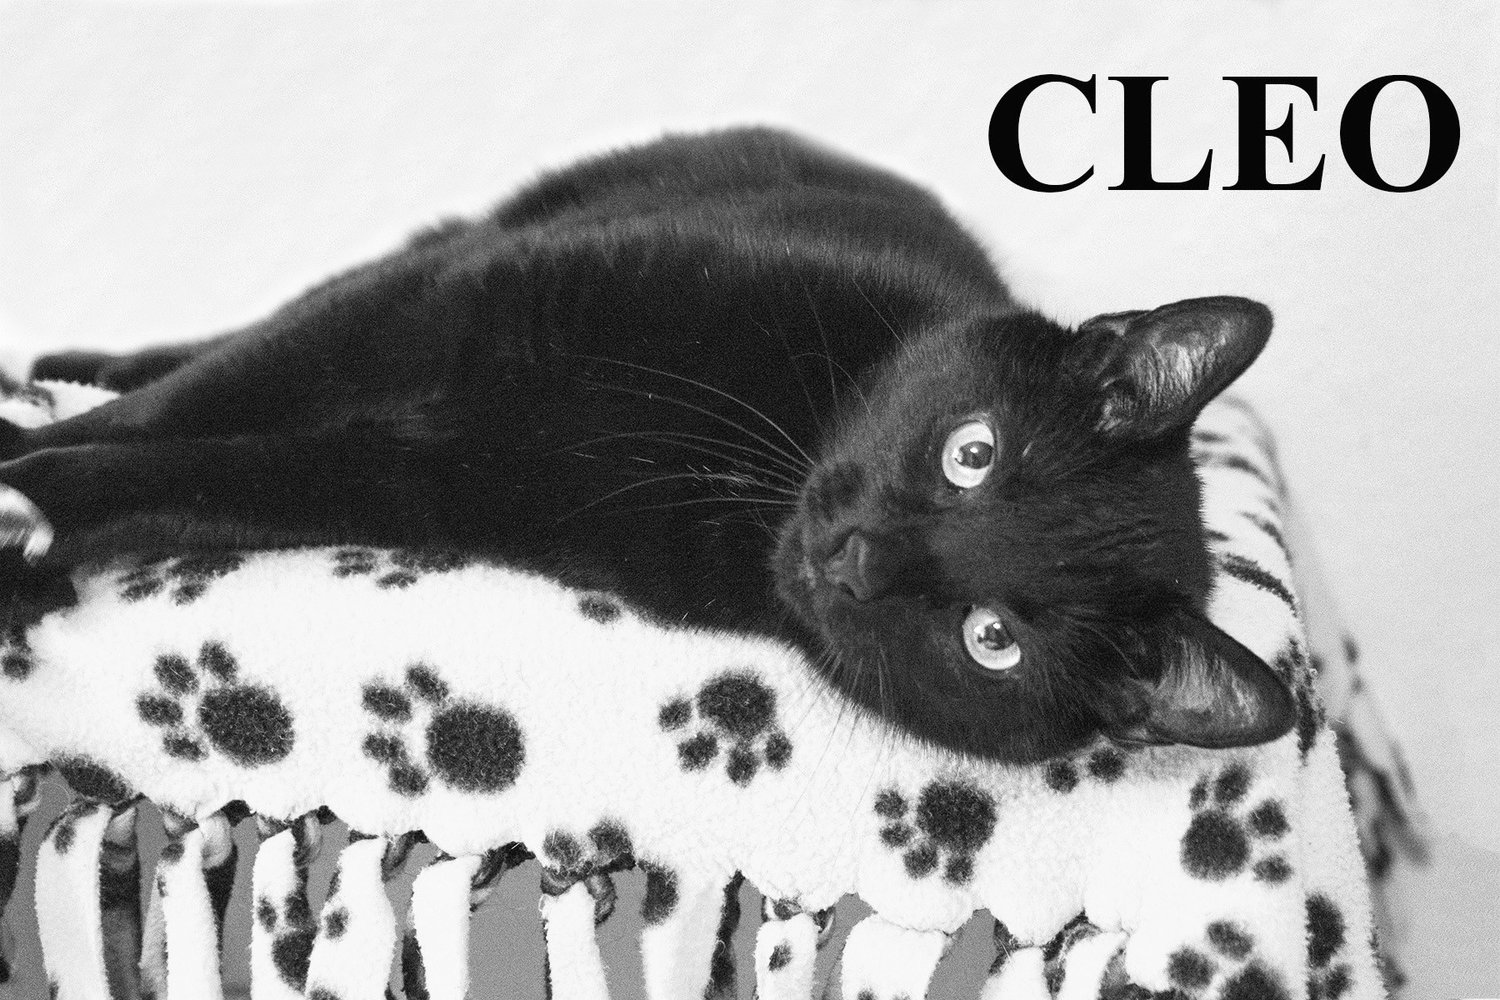 Cleo is one of the animals that will be available for adoption from APET, unless she is adopted beforehand, Saturday.